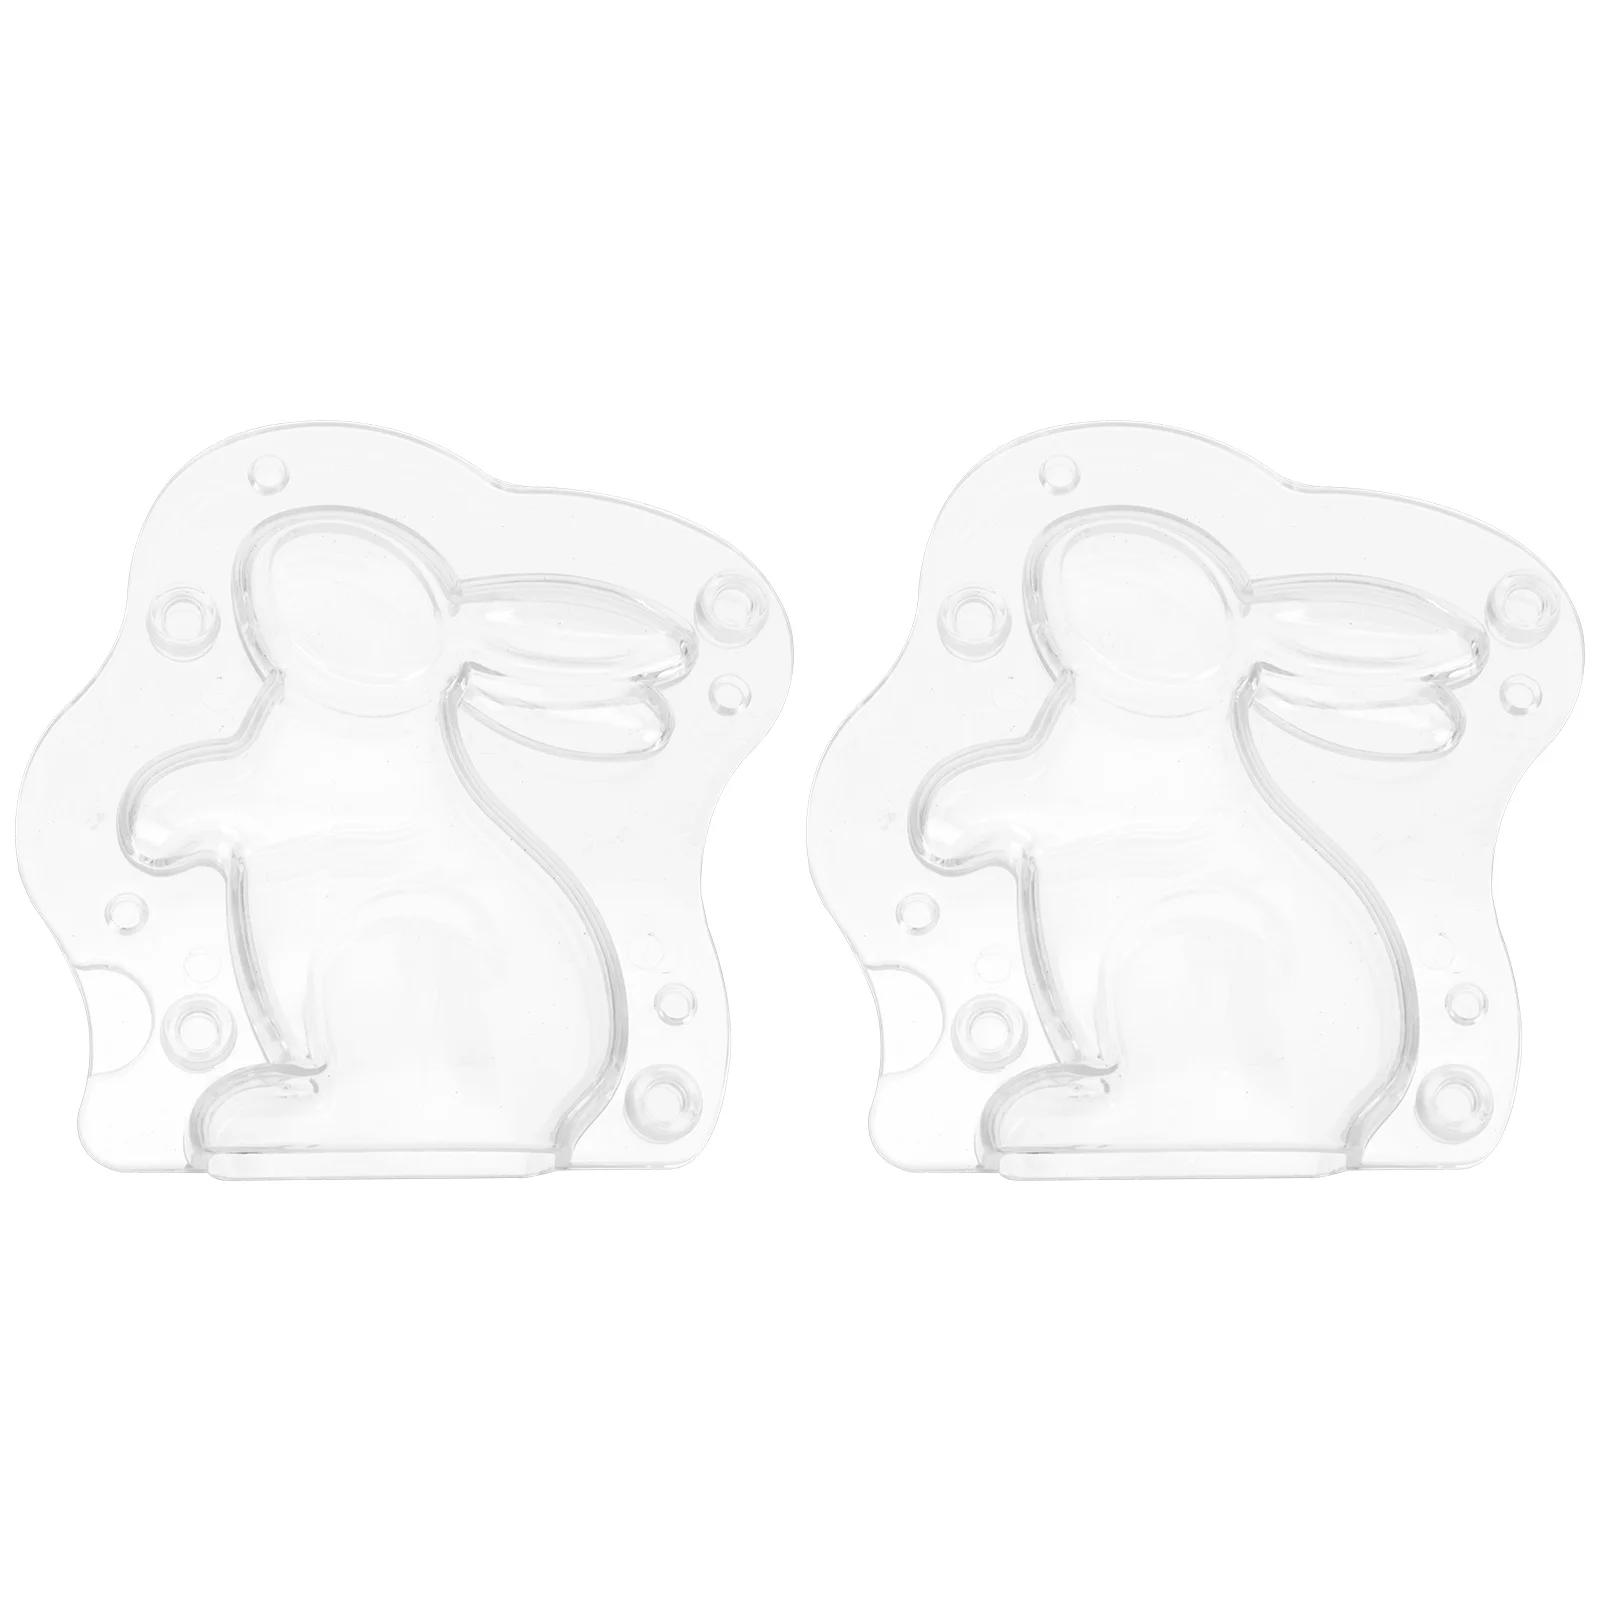 

Easter Mold Molds Bunny Rabbit Cookie Chocolate Candy Baking Fondant Diy Jelly Cake Silcone Soap Cupcake Dessert Snack Shape